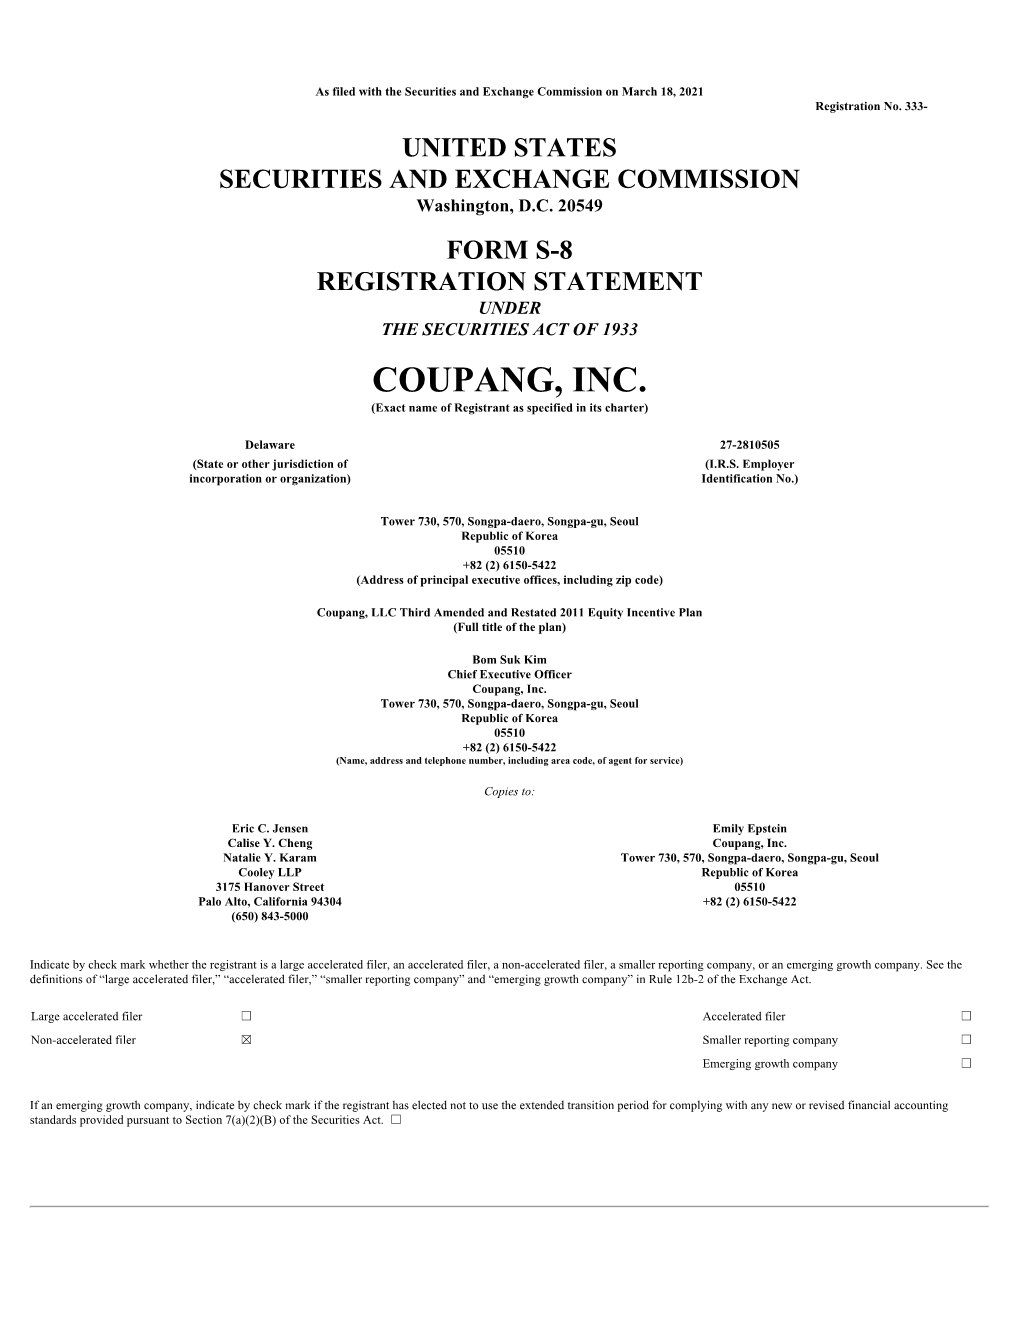 COUPANG, INC. (Exact Name of Registrant As Specified in Its Charter)